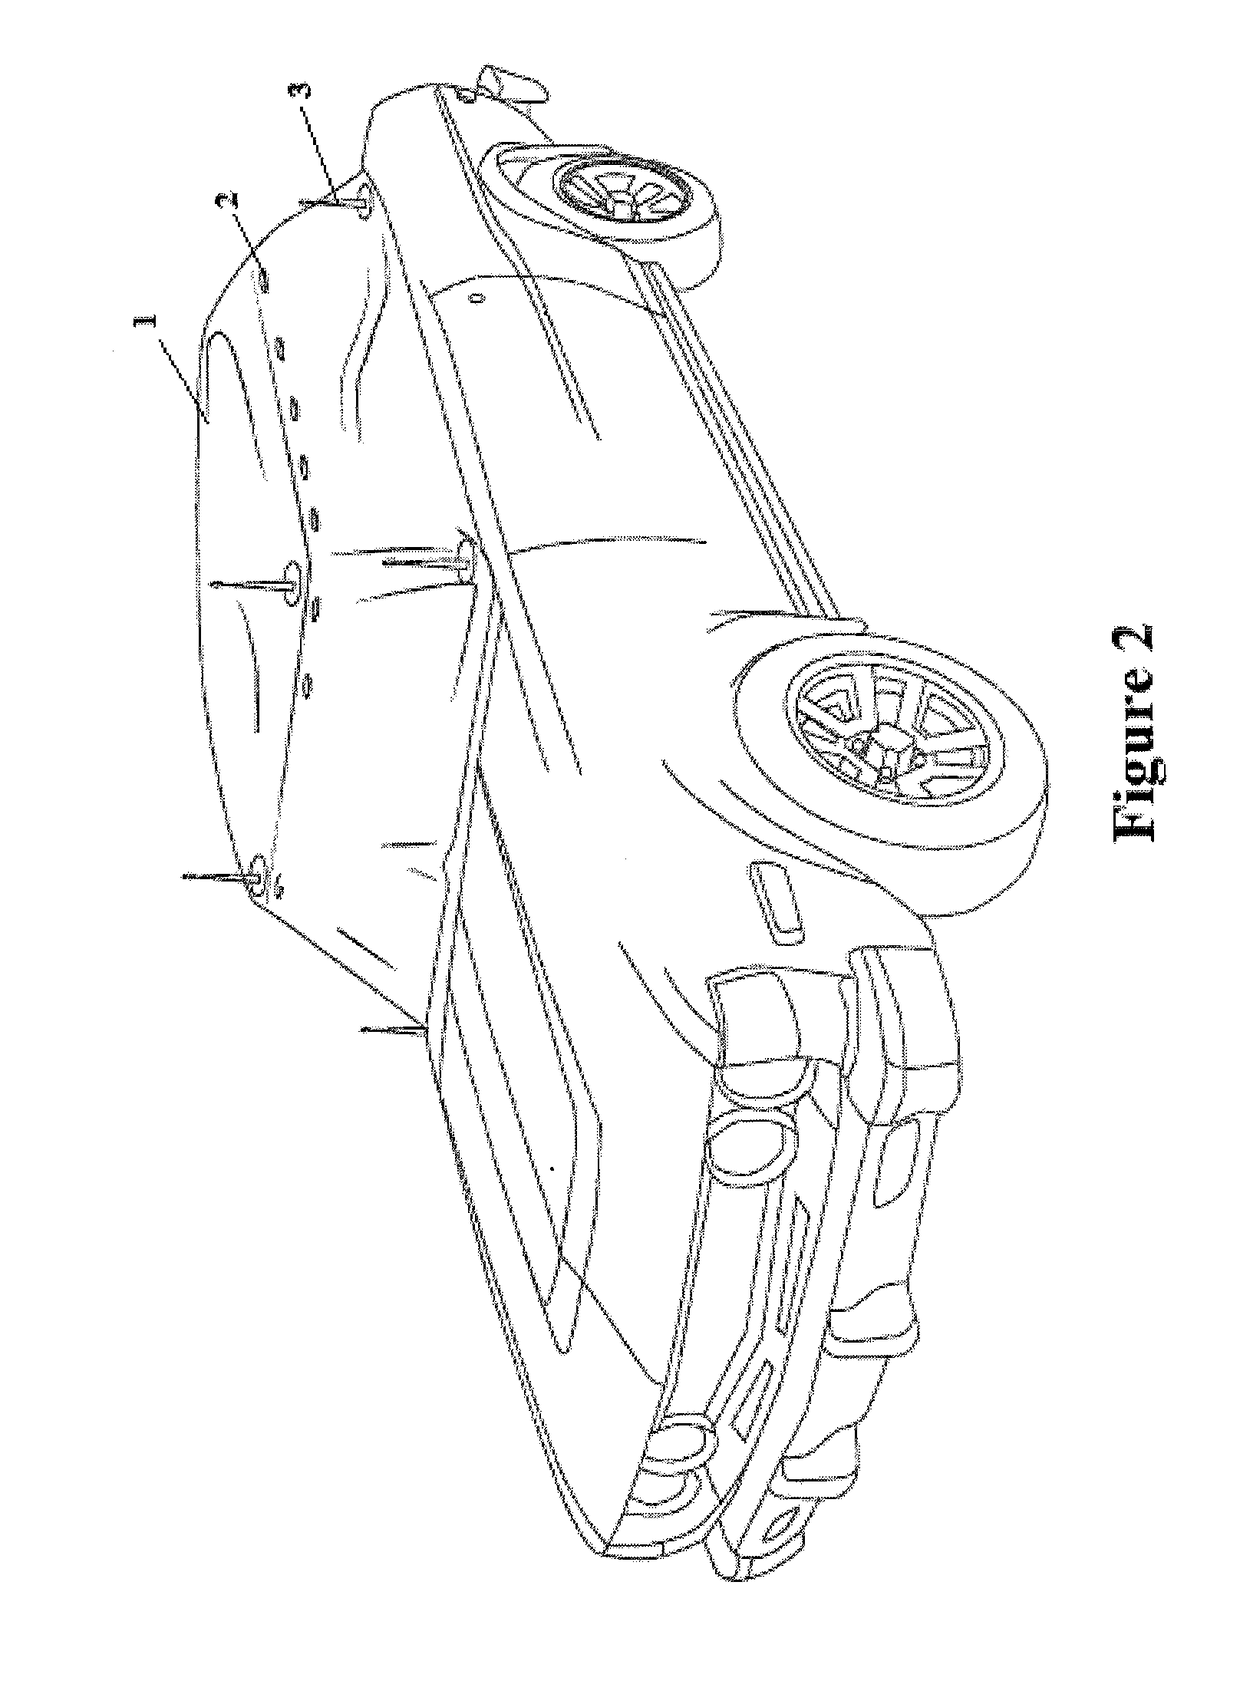 Vehicle covering structure